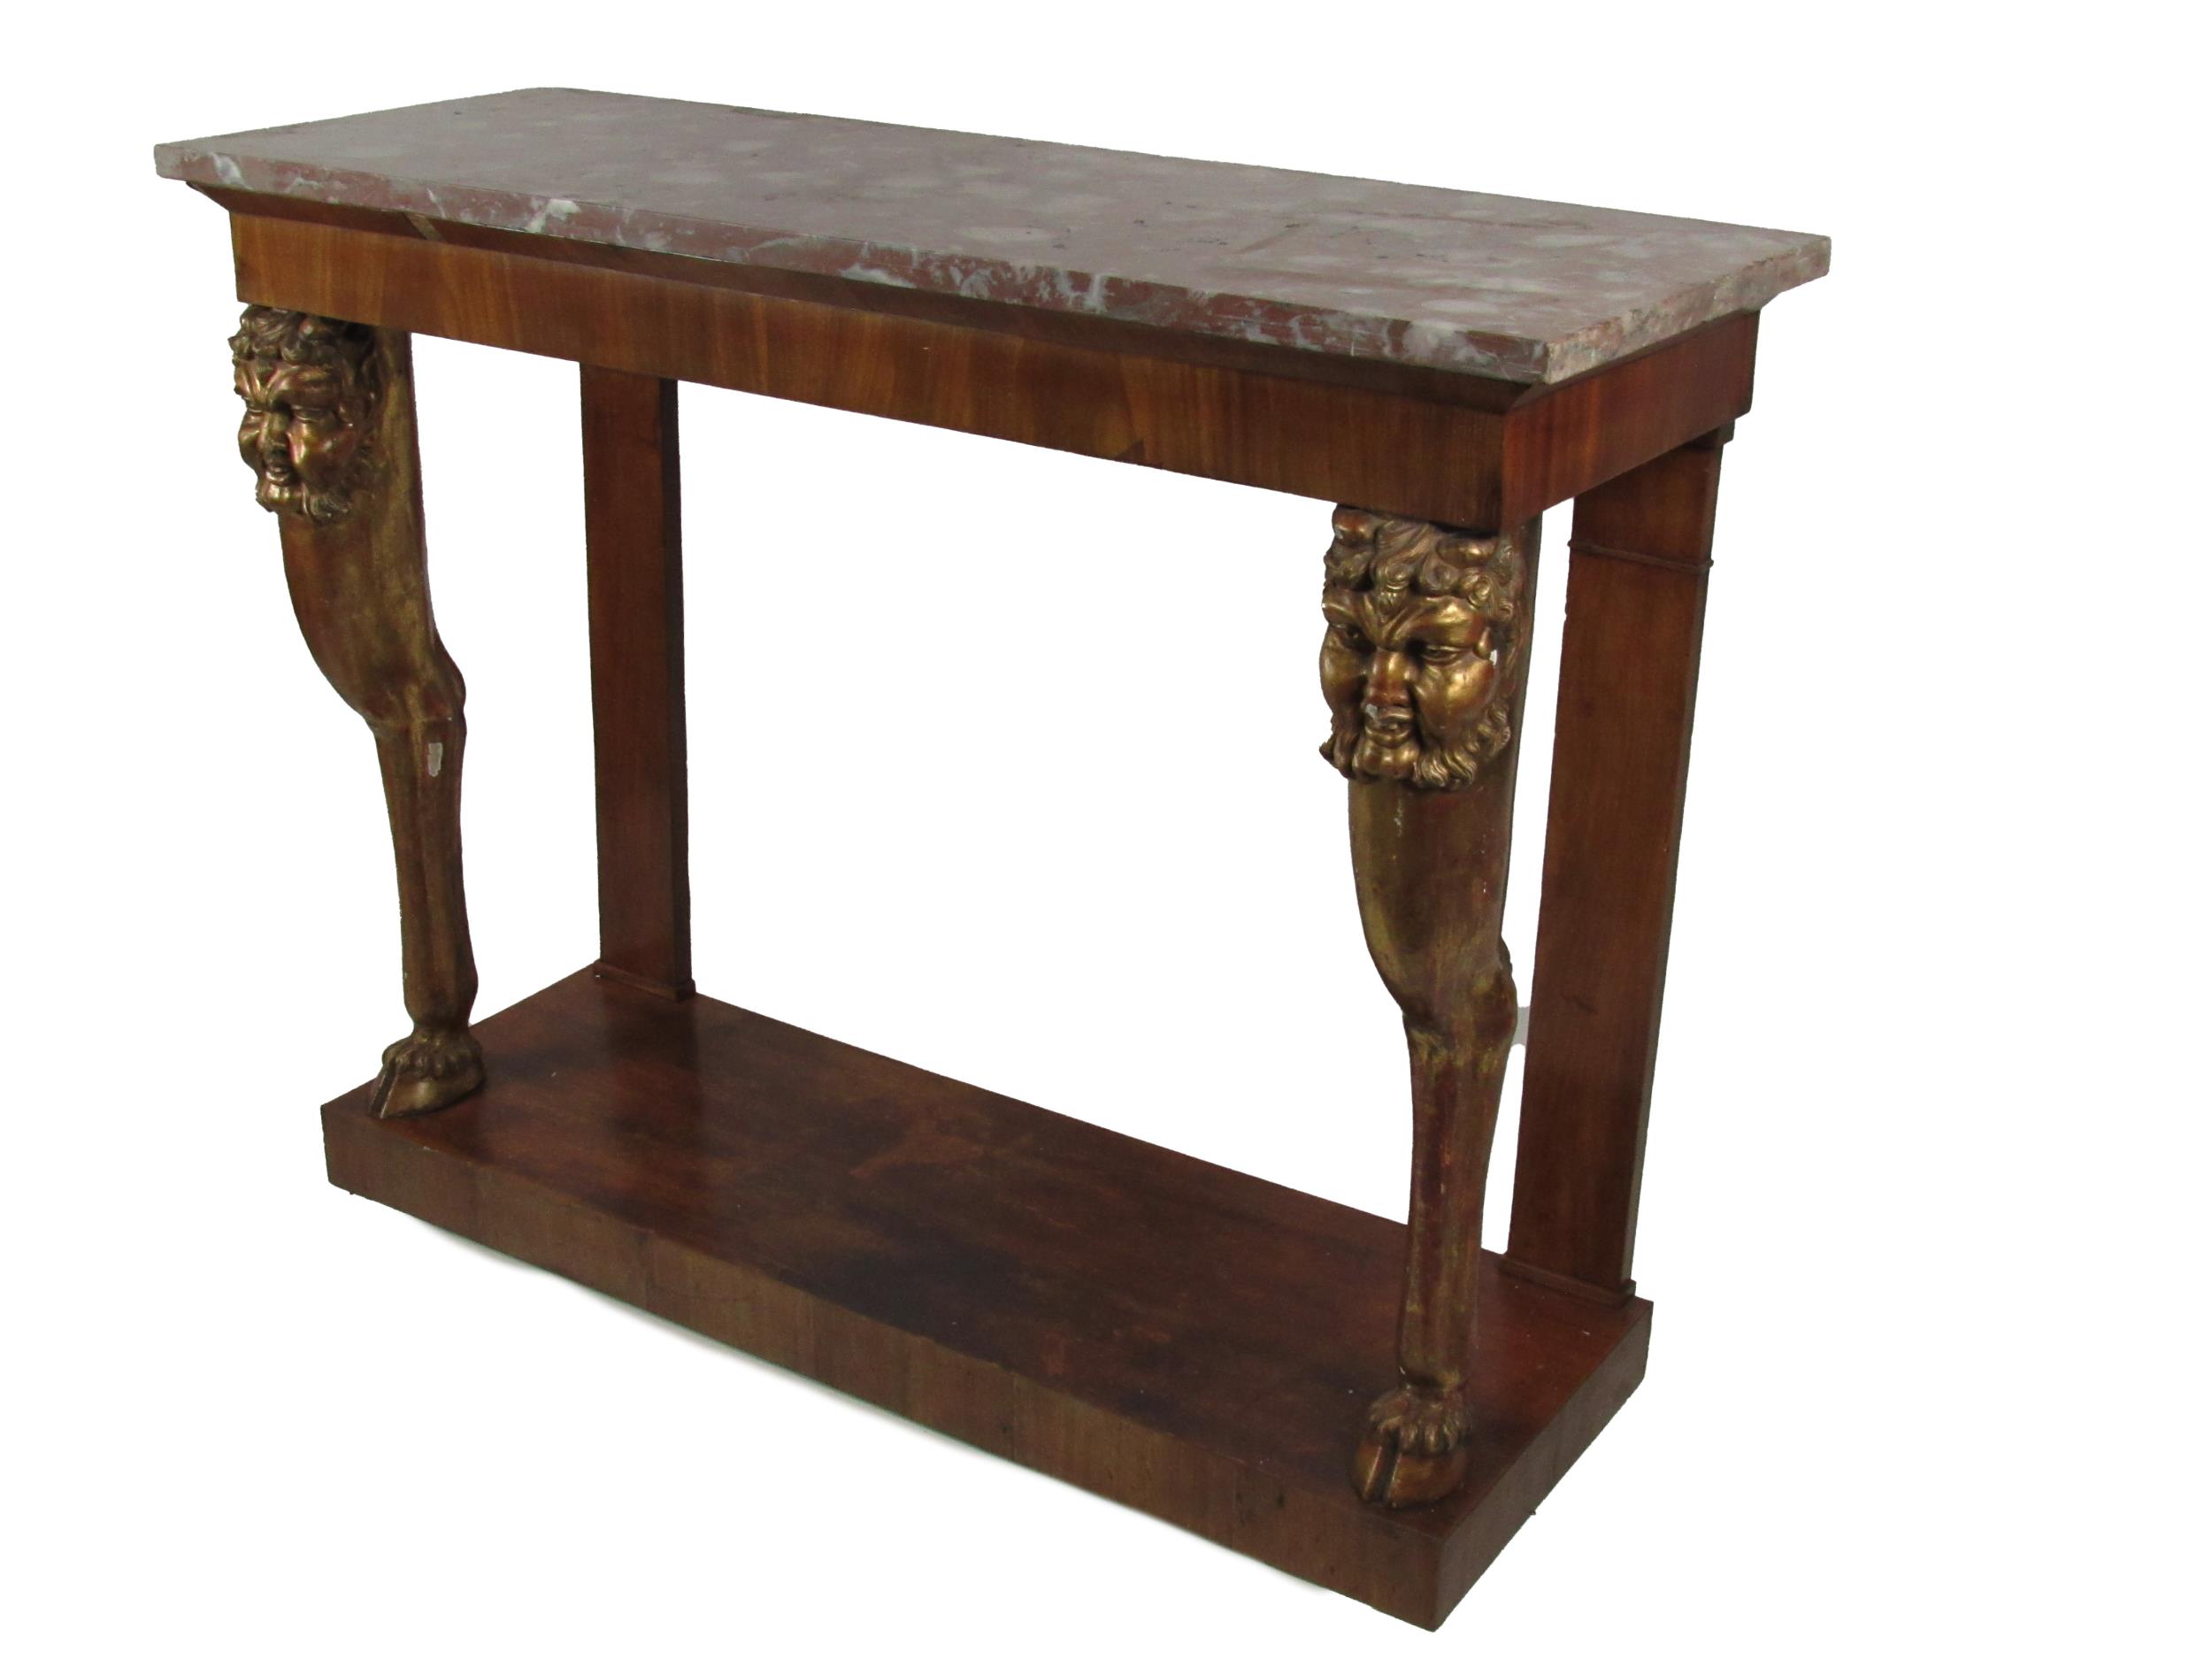 An unusual late 18th Century / early 19th Century mahogany and parcel gilt Side or Console Table,